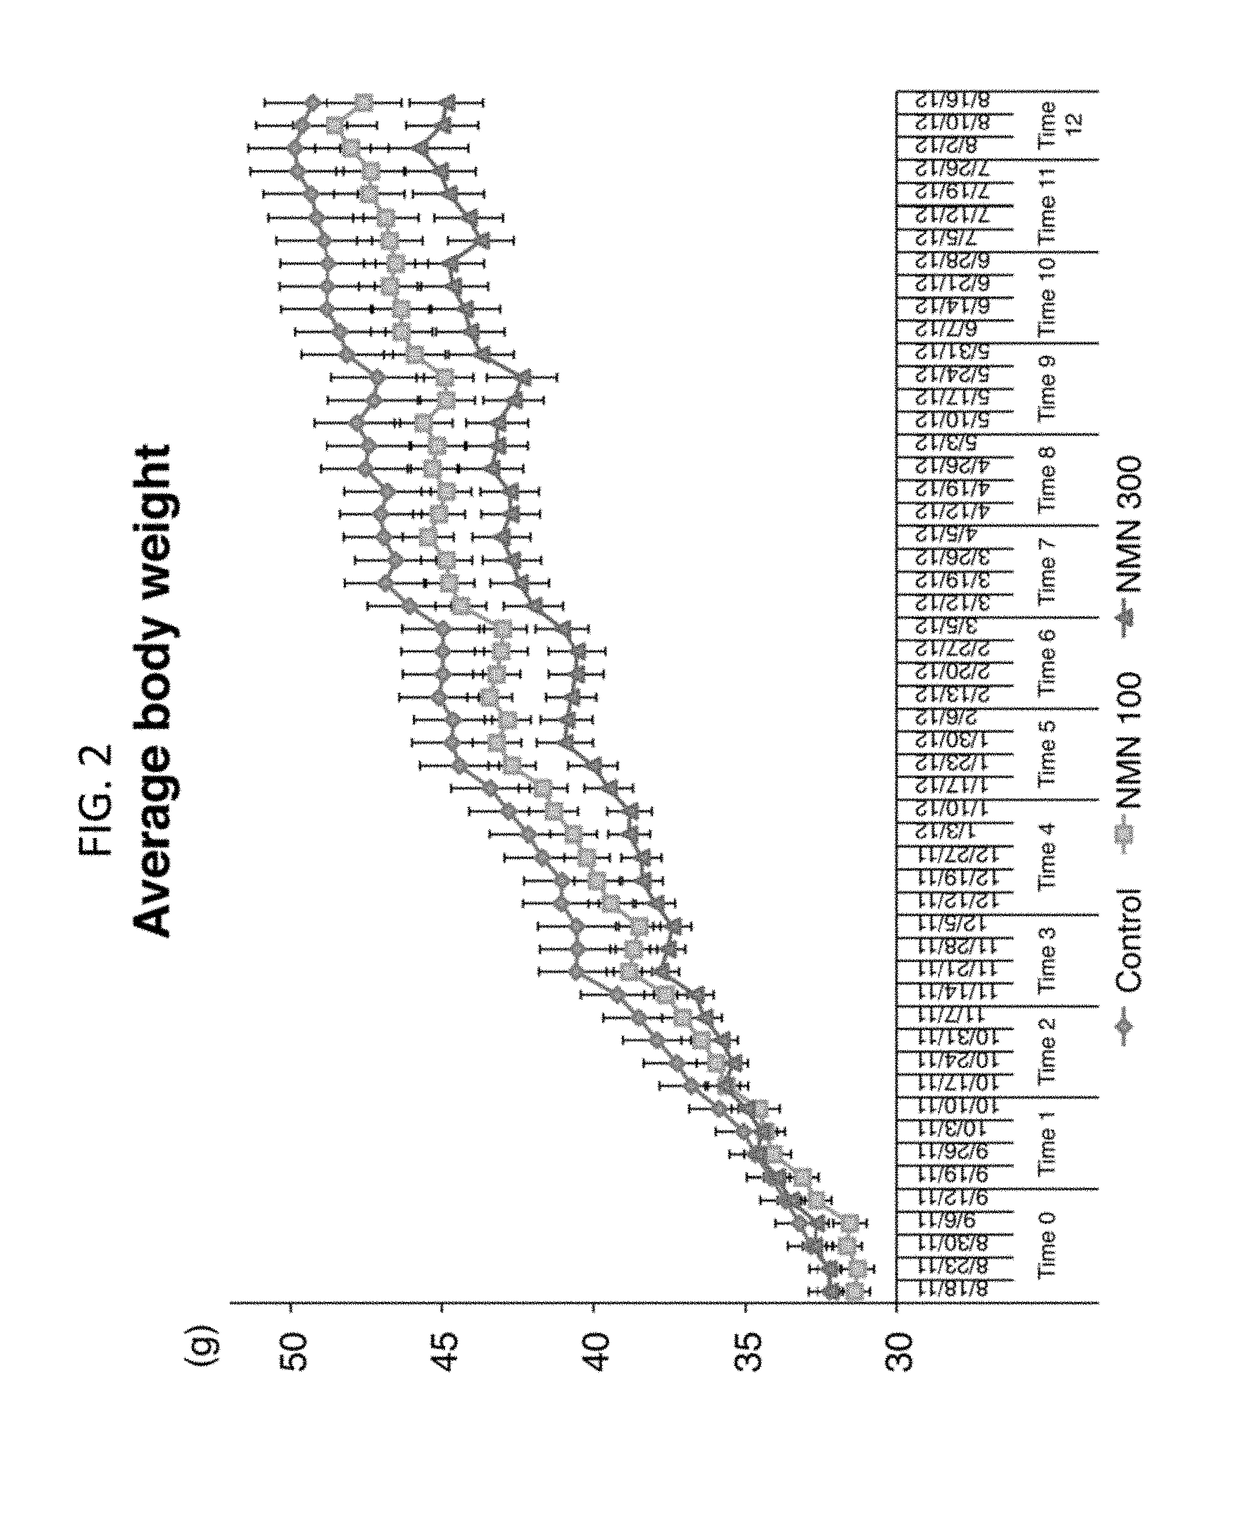 Administration of nicotinamide mononucleotide in the treatment of disease